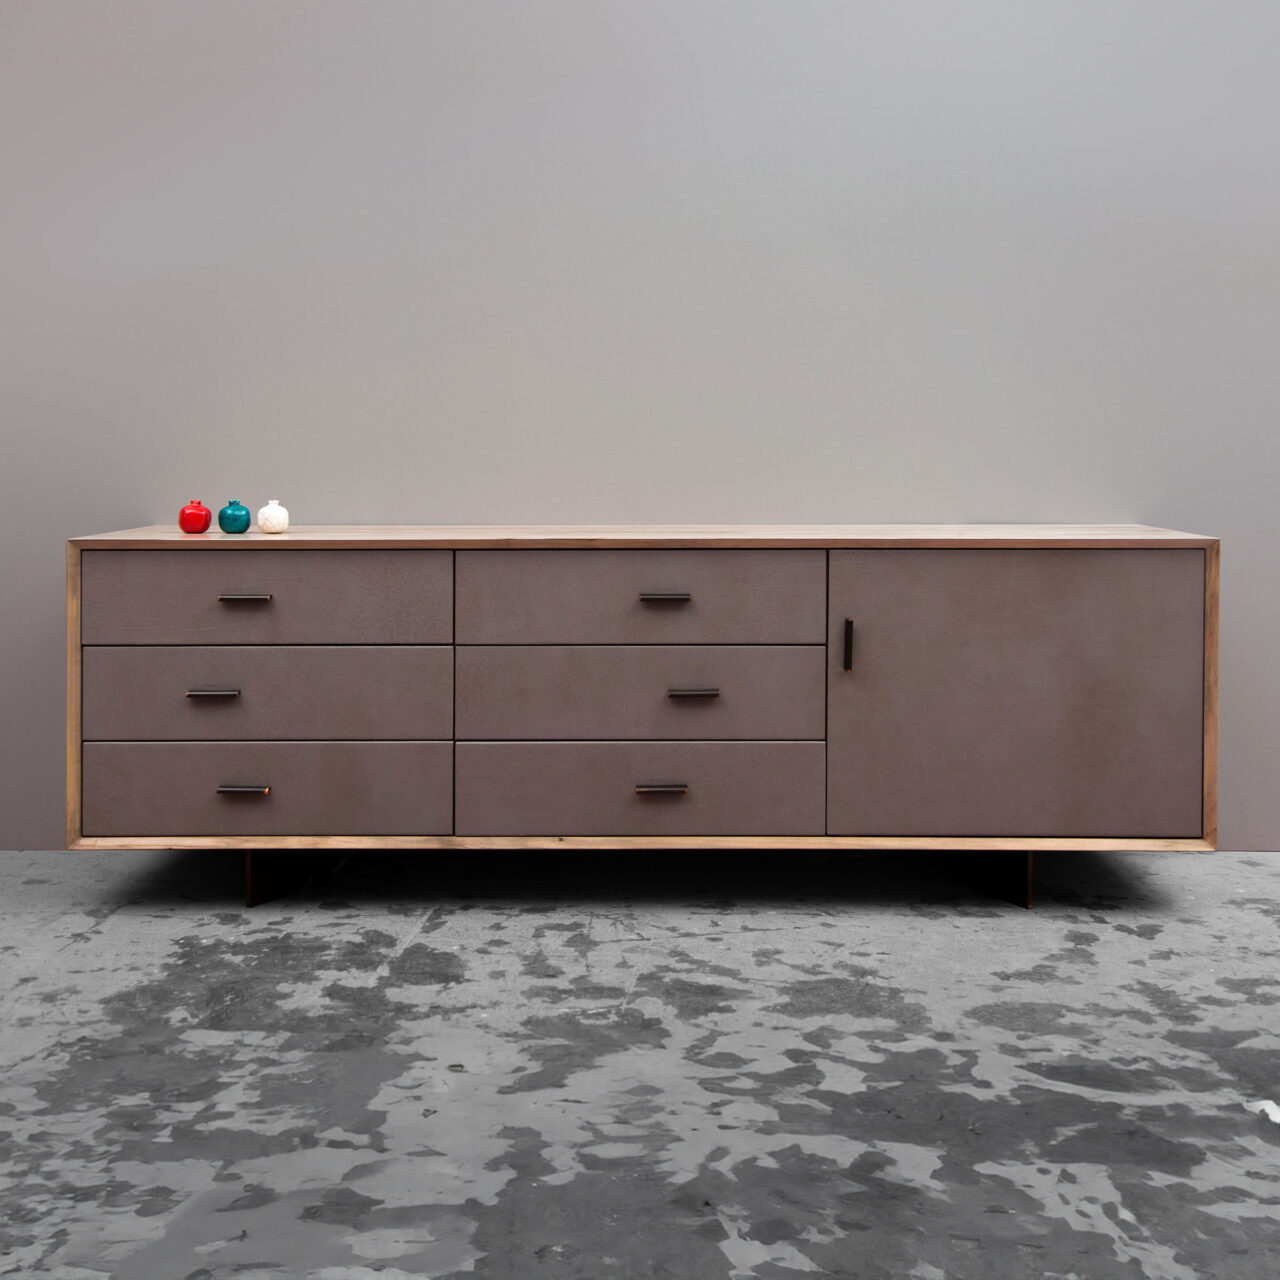 A SENTIENT Murlough luxury credenza with a minimalist white design and distinctive curved wooden side panels, staged against an industrial backdrop.